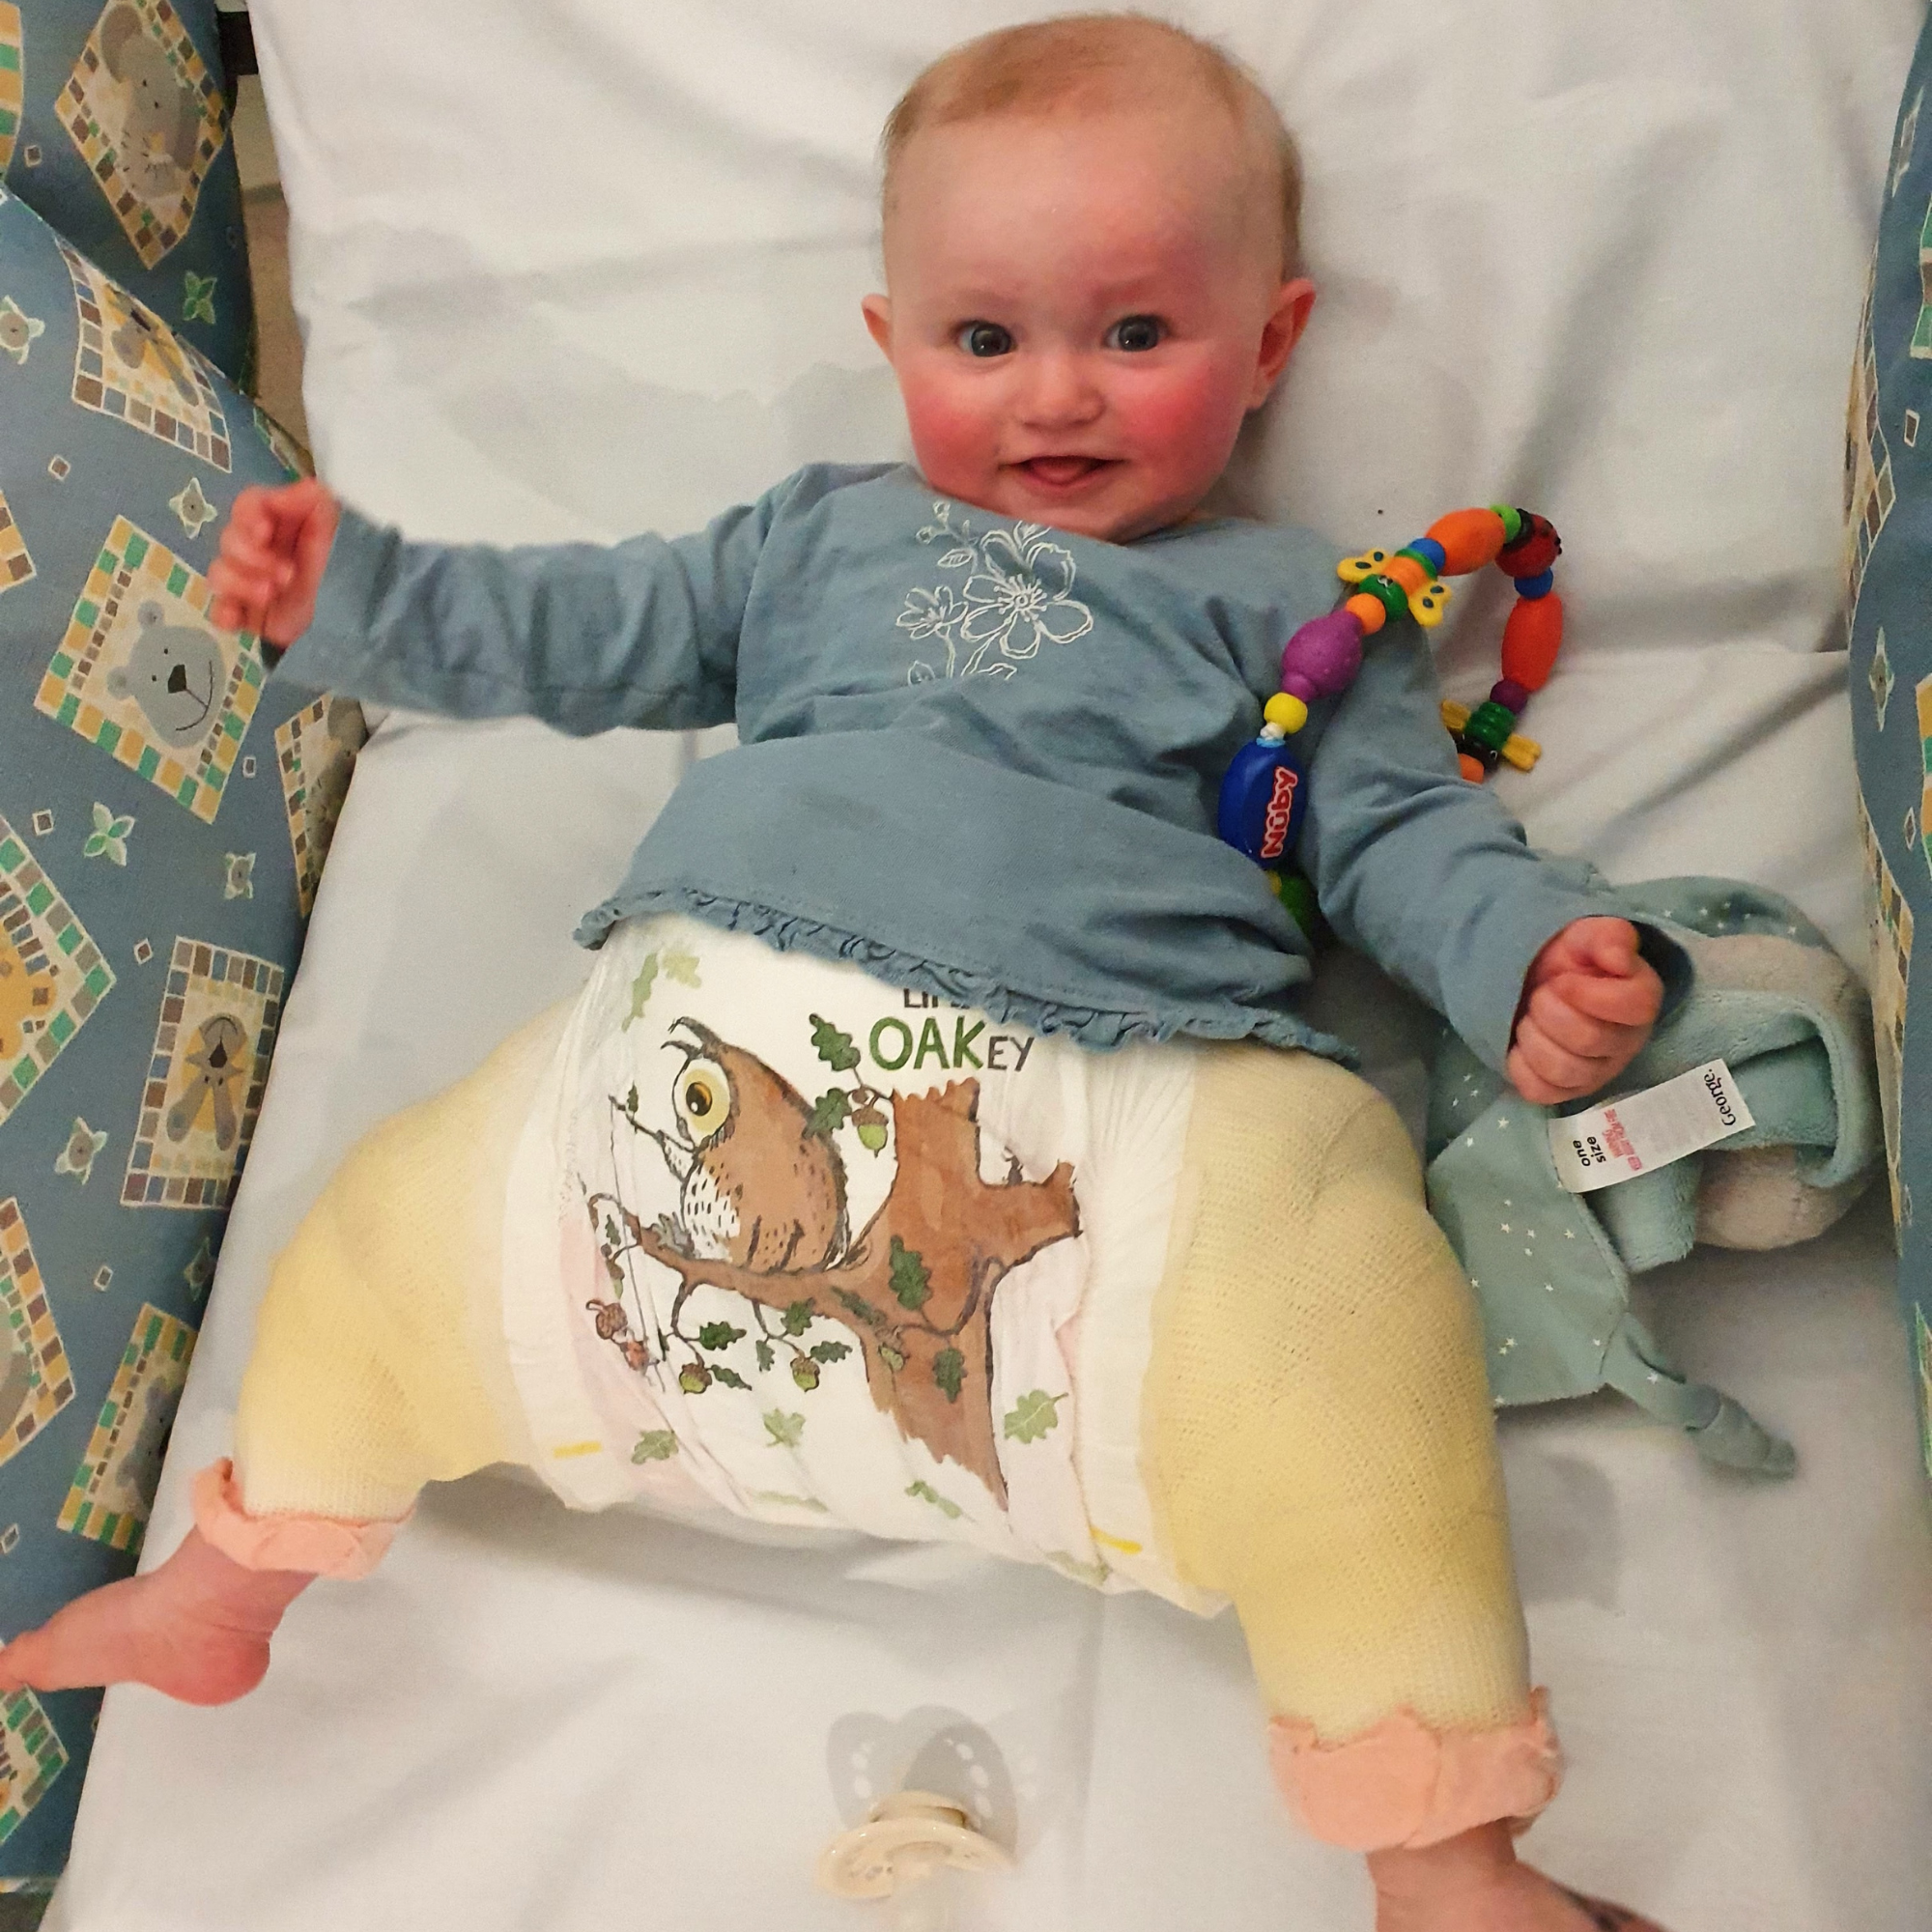 Beautiful 4 month old baby lying in a hospital bed wearing a hip spica cast playing with her toys | Hip Dysplasia - Clair de Lune UK